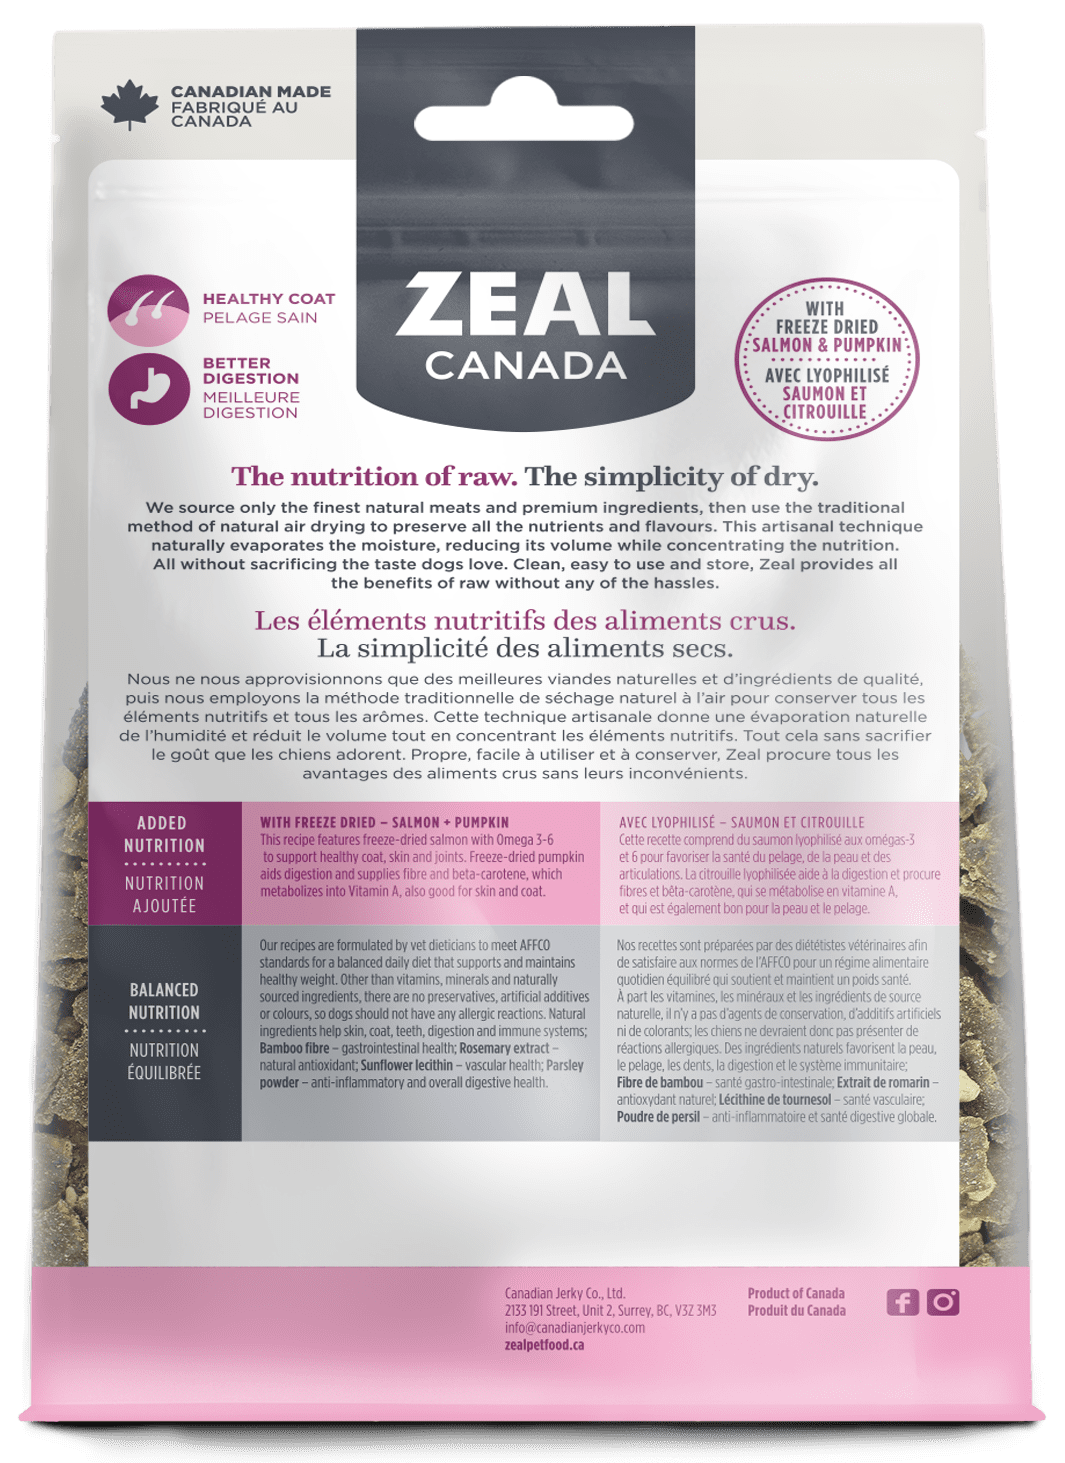 Zeal Canada - Gently Air-Dried Turkey with Freeze-Dried Salmon & Pumpkin (For Dogs - 0